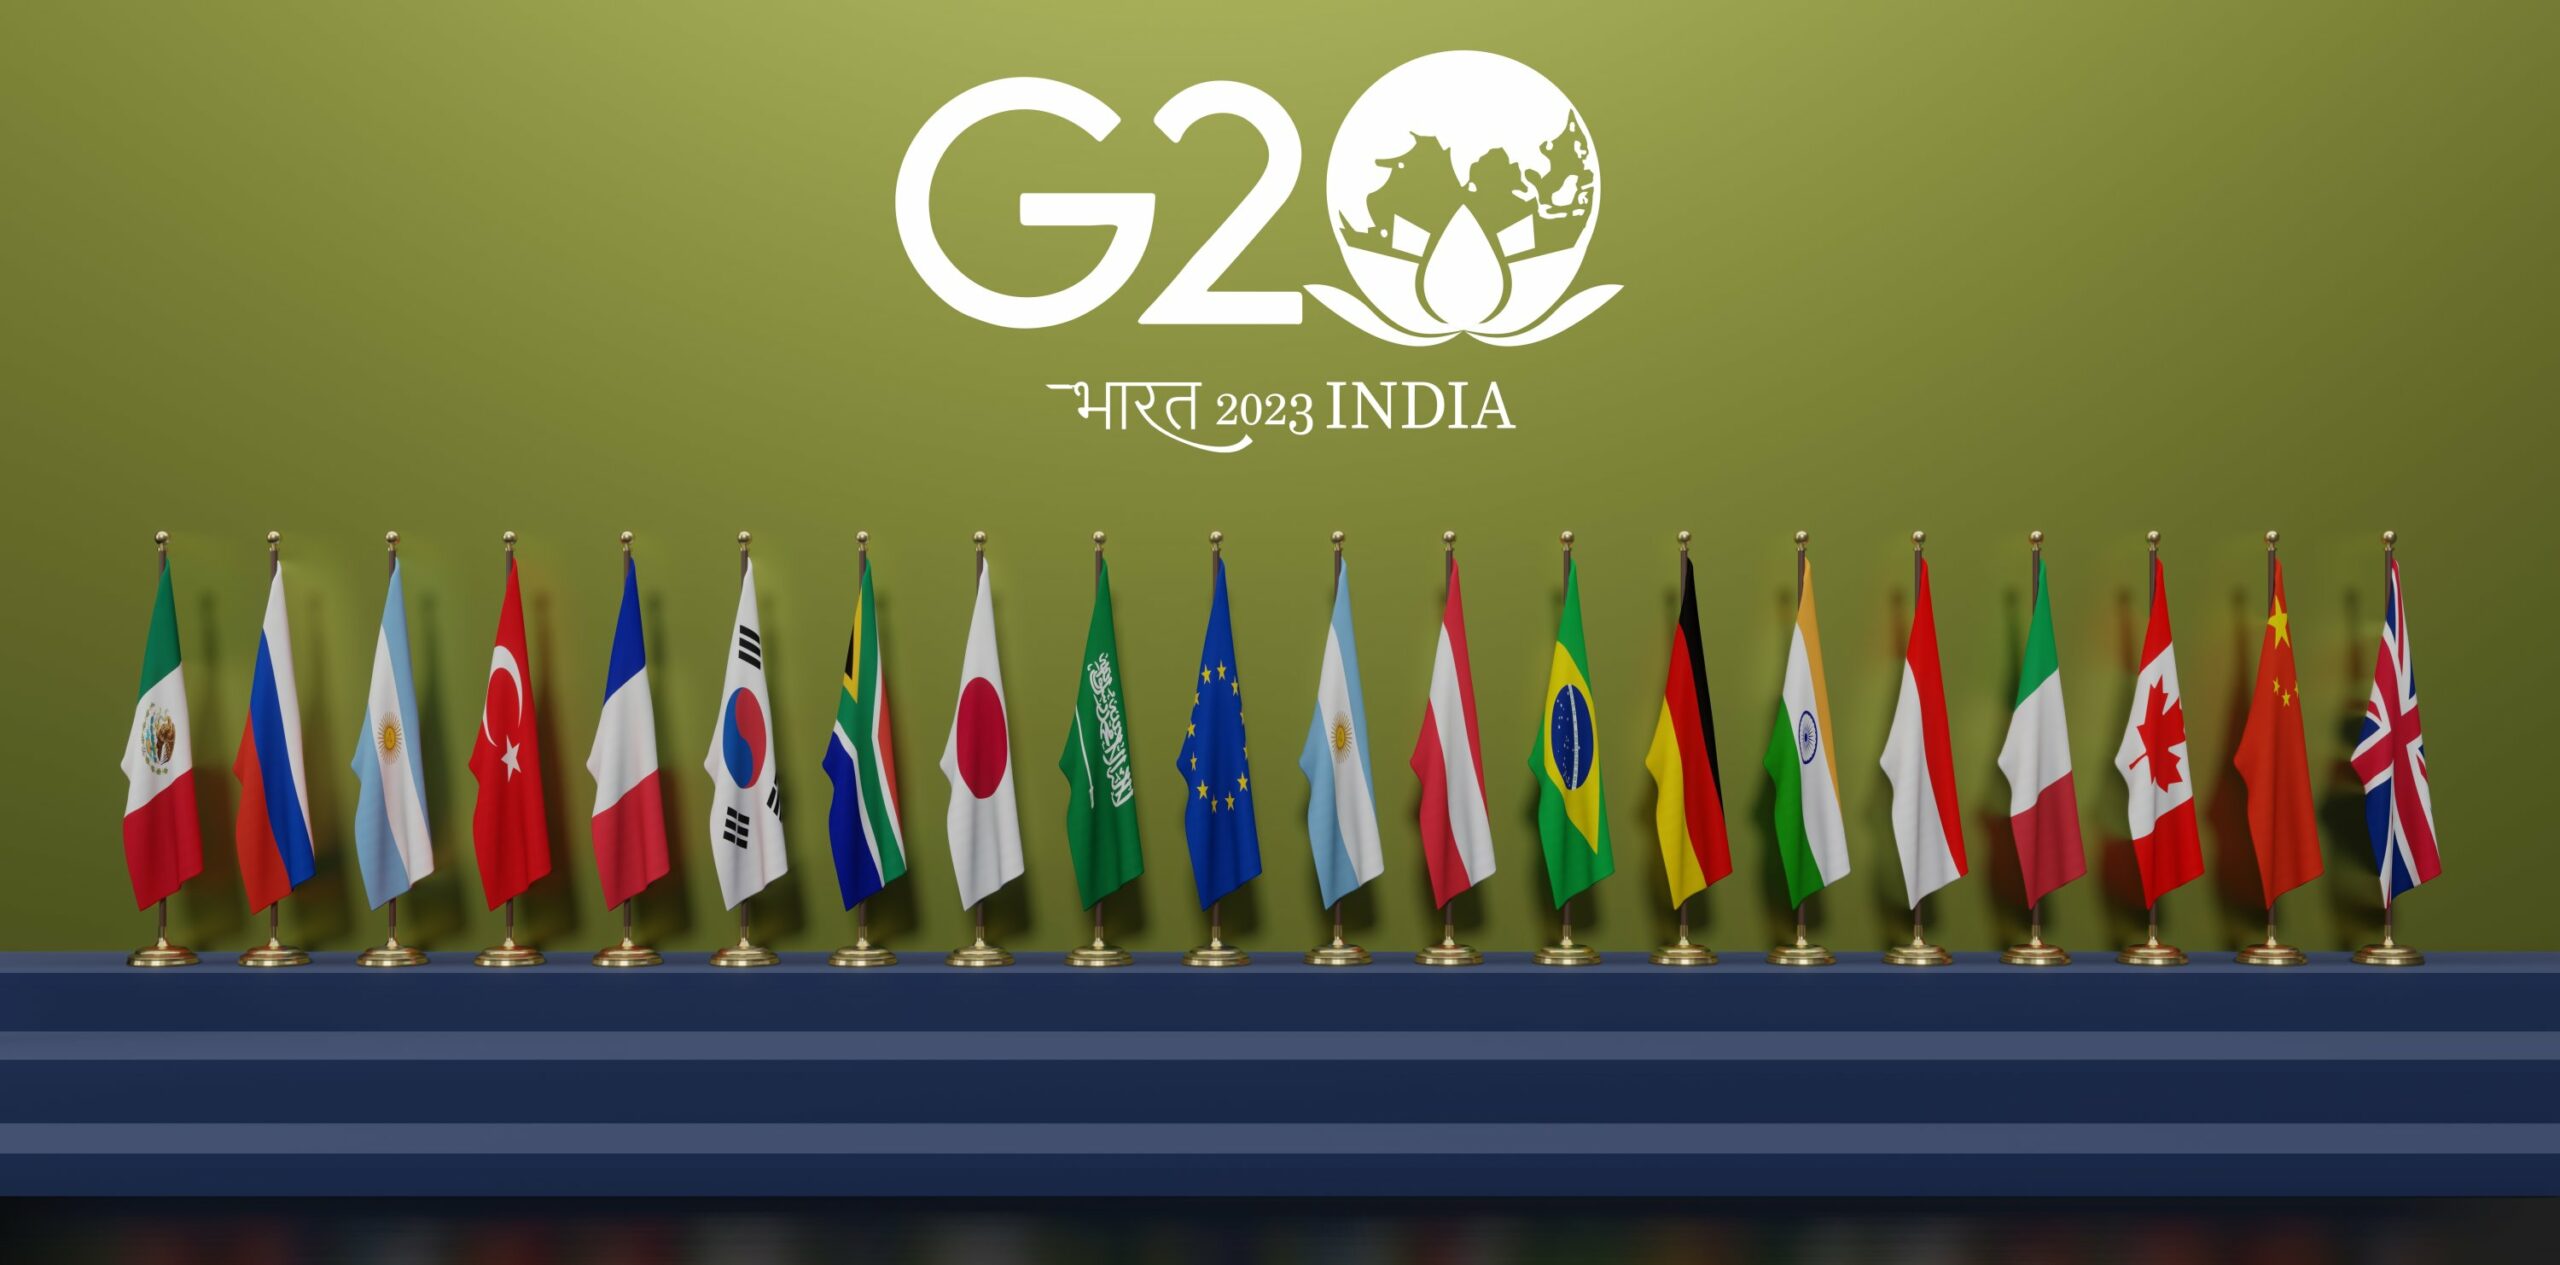 India's G20 invitation: A significant step towards